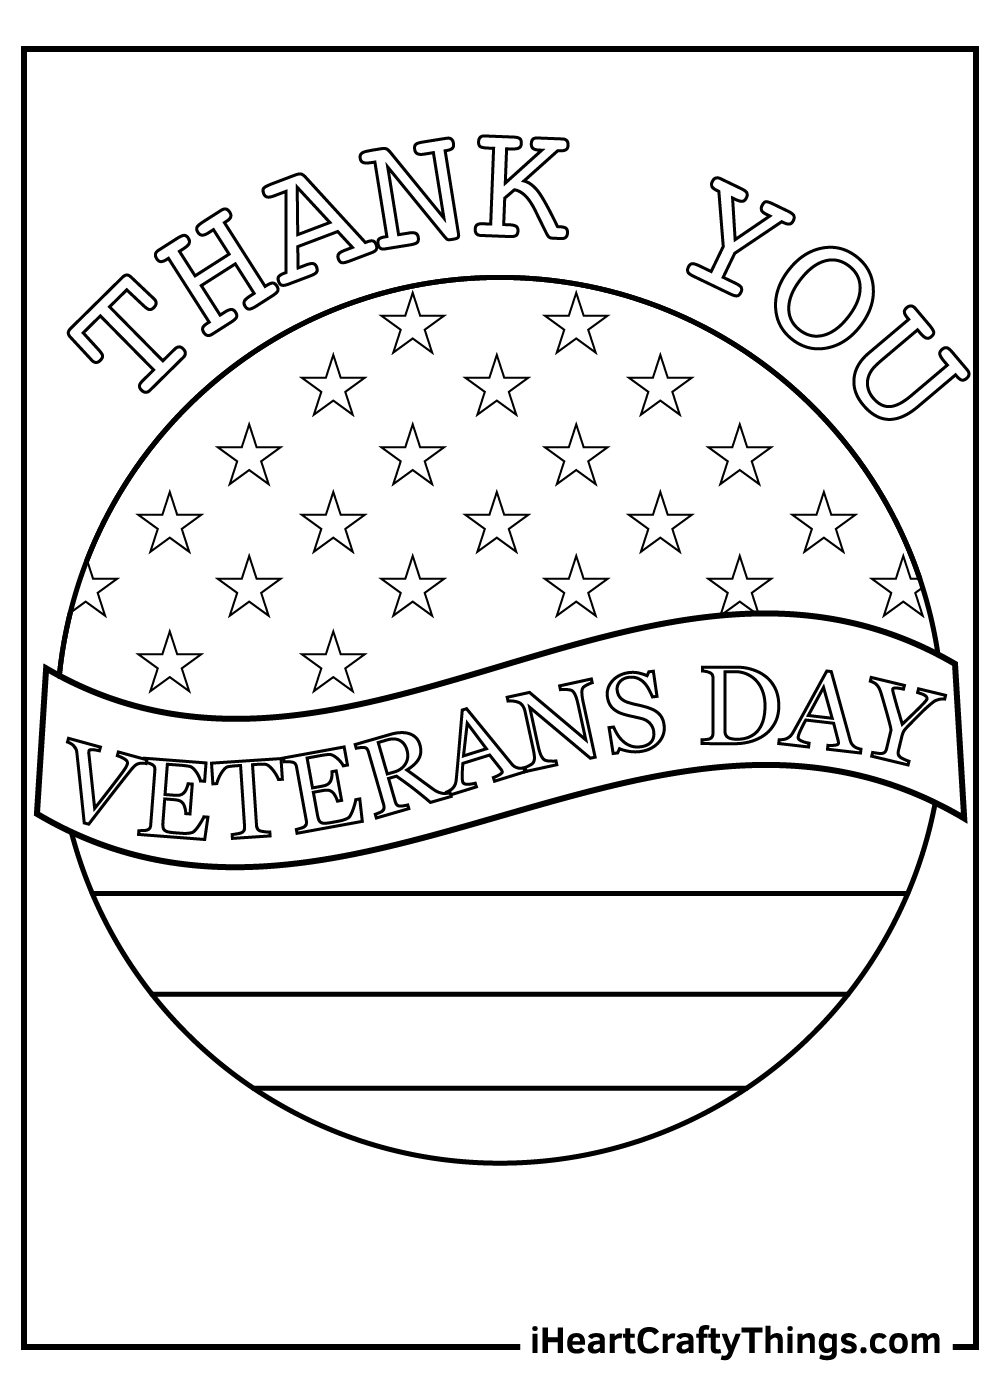 Veterans day lor page word find and poster print